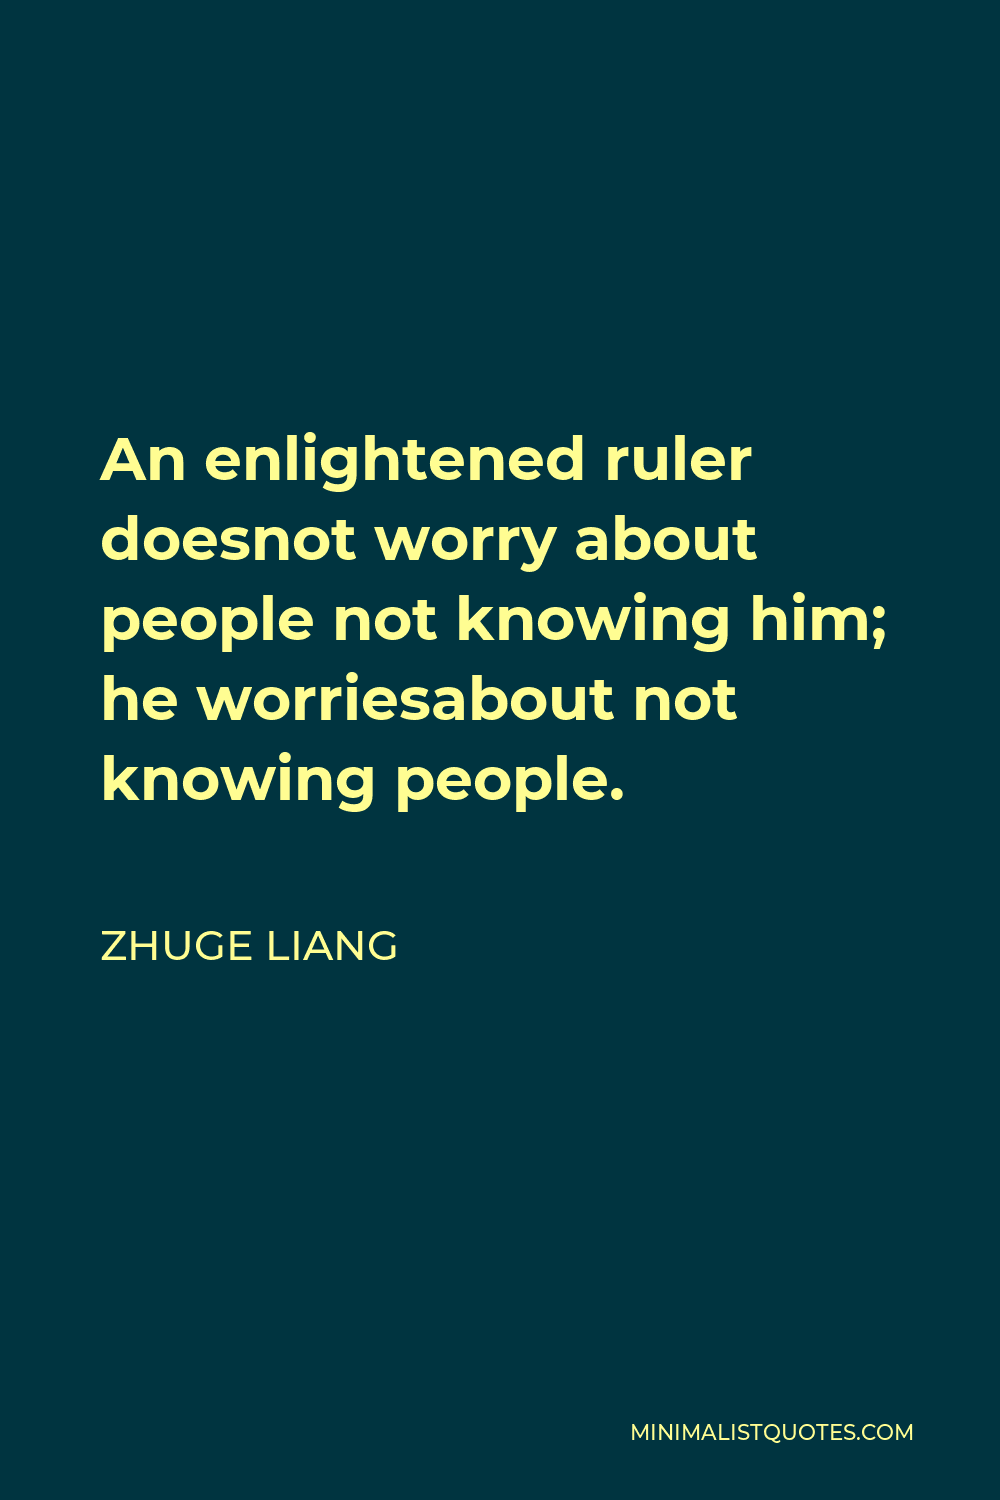 Zhuge Liang Quote - An enlightened ruler doesnot worry about people not knowing him; he worriesabout not knowing people.